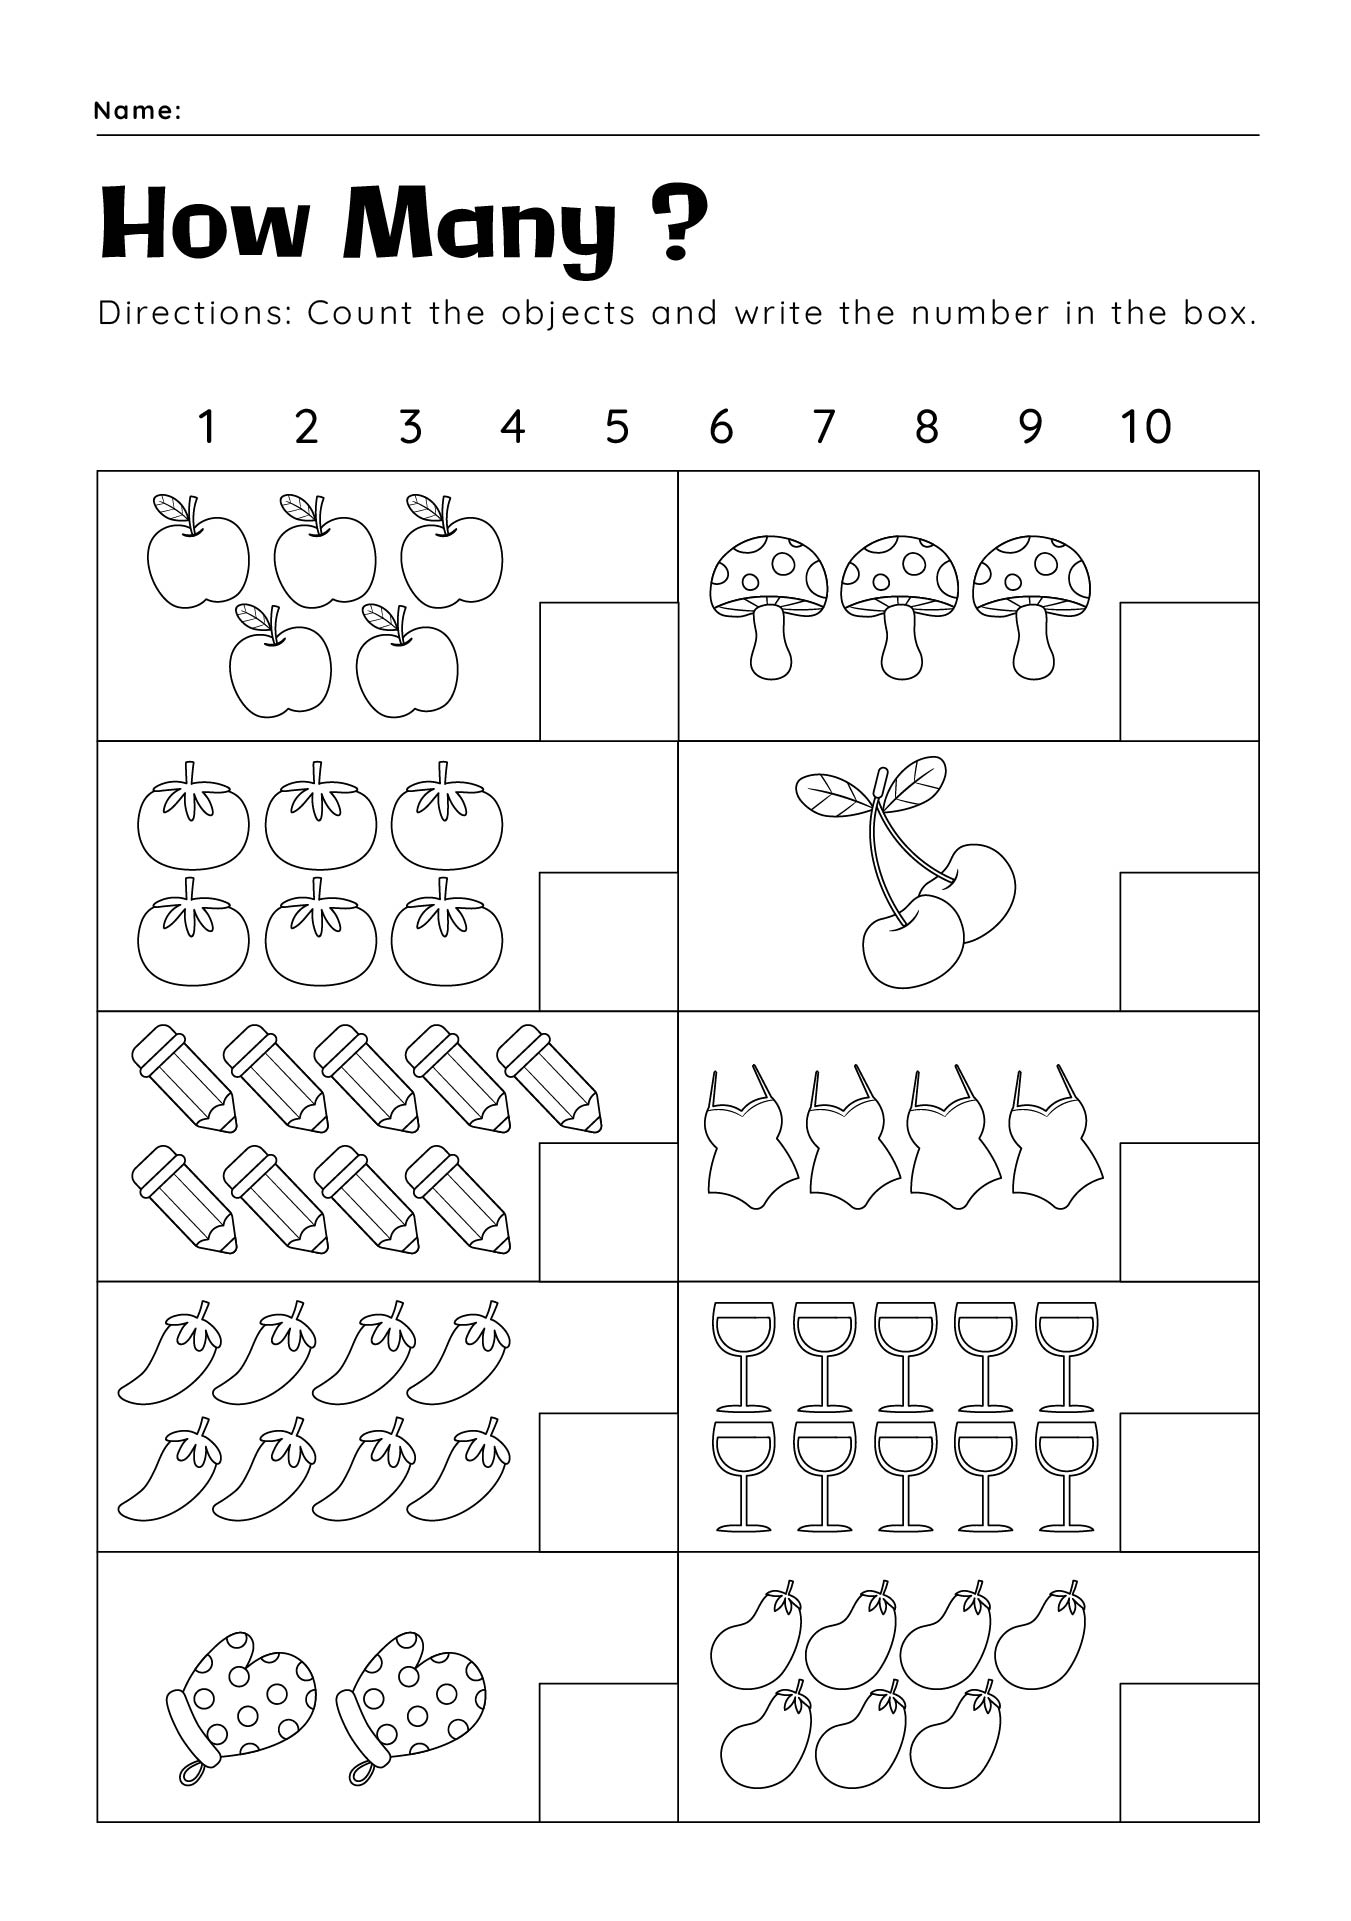 6-best-images-of-kindergarten-printable-counting-1-10-worksheets-counting-numbers-1-10